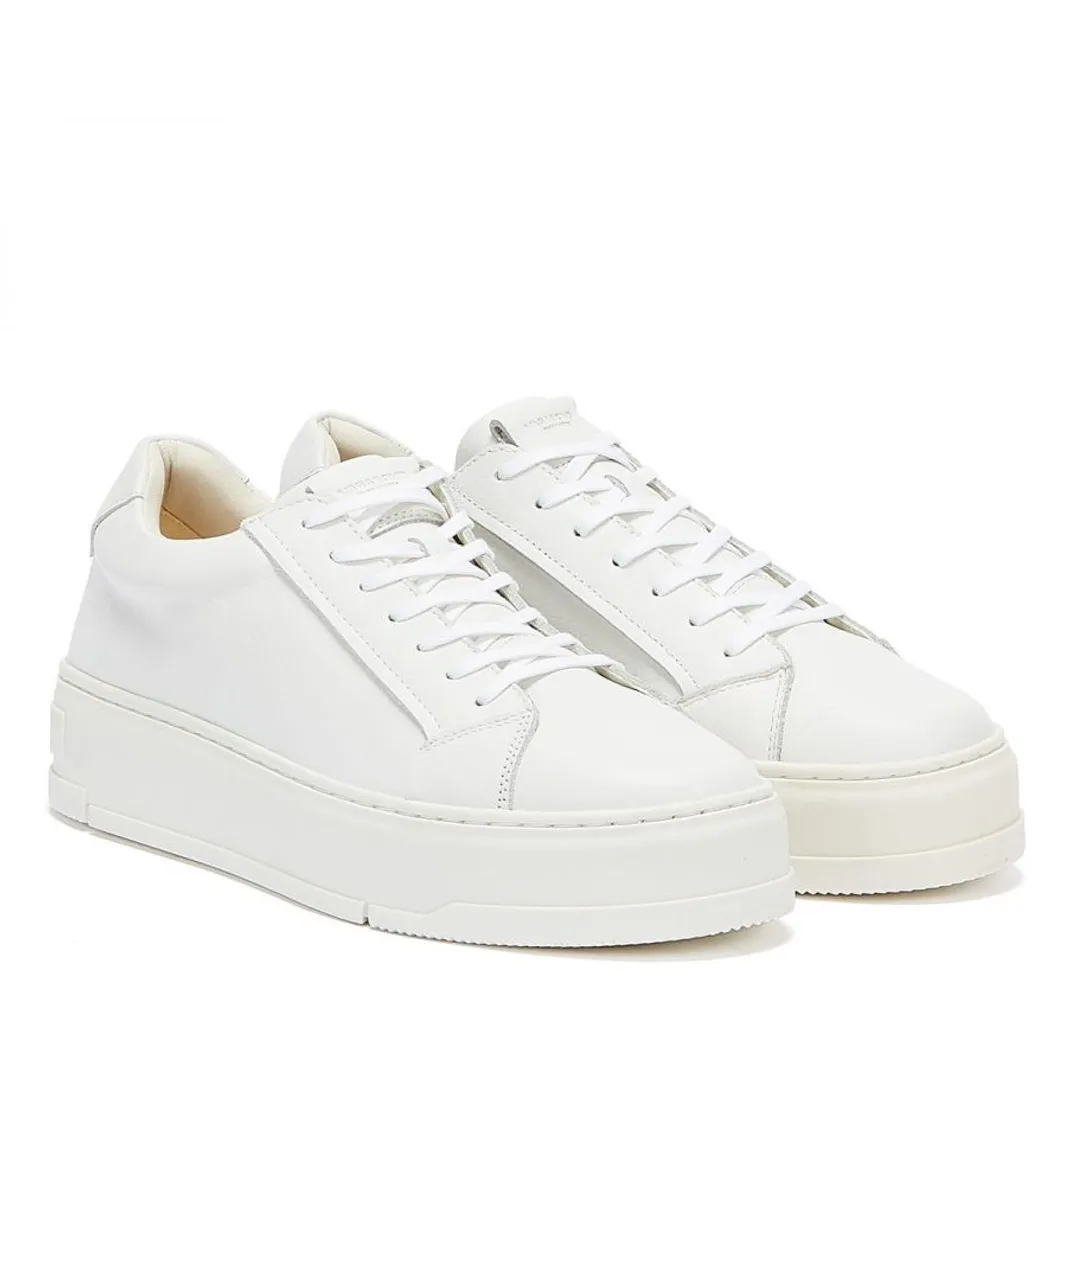 Vagabond Judy Leather Womens Trainers - (White) Rubber